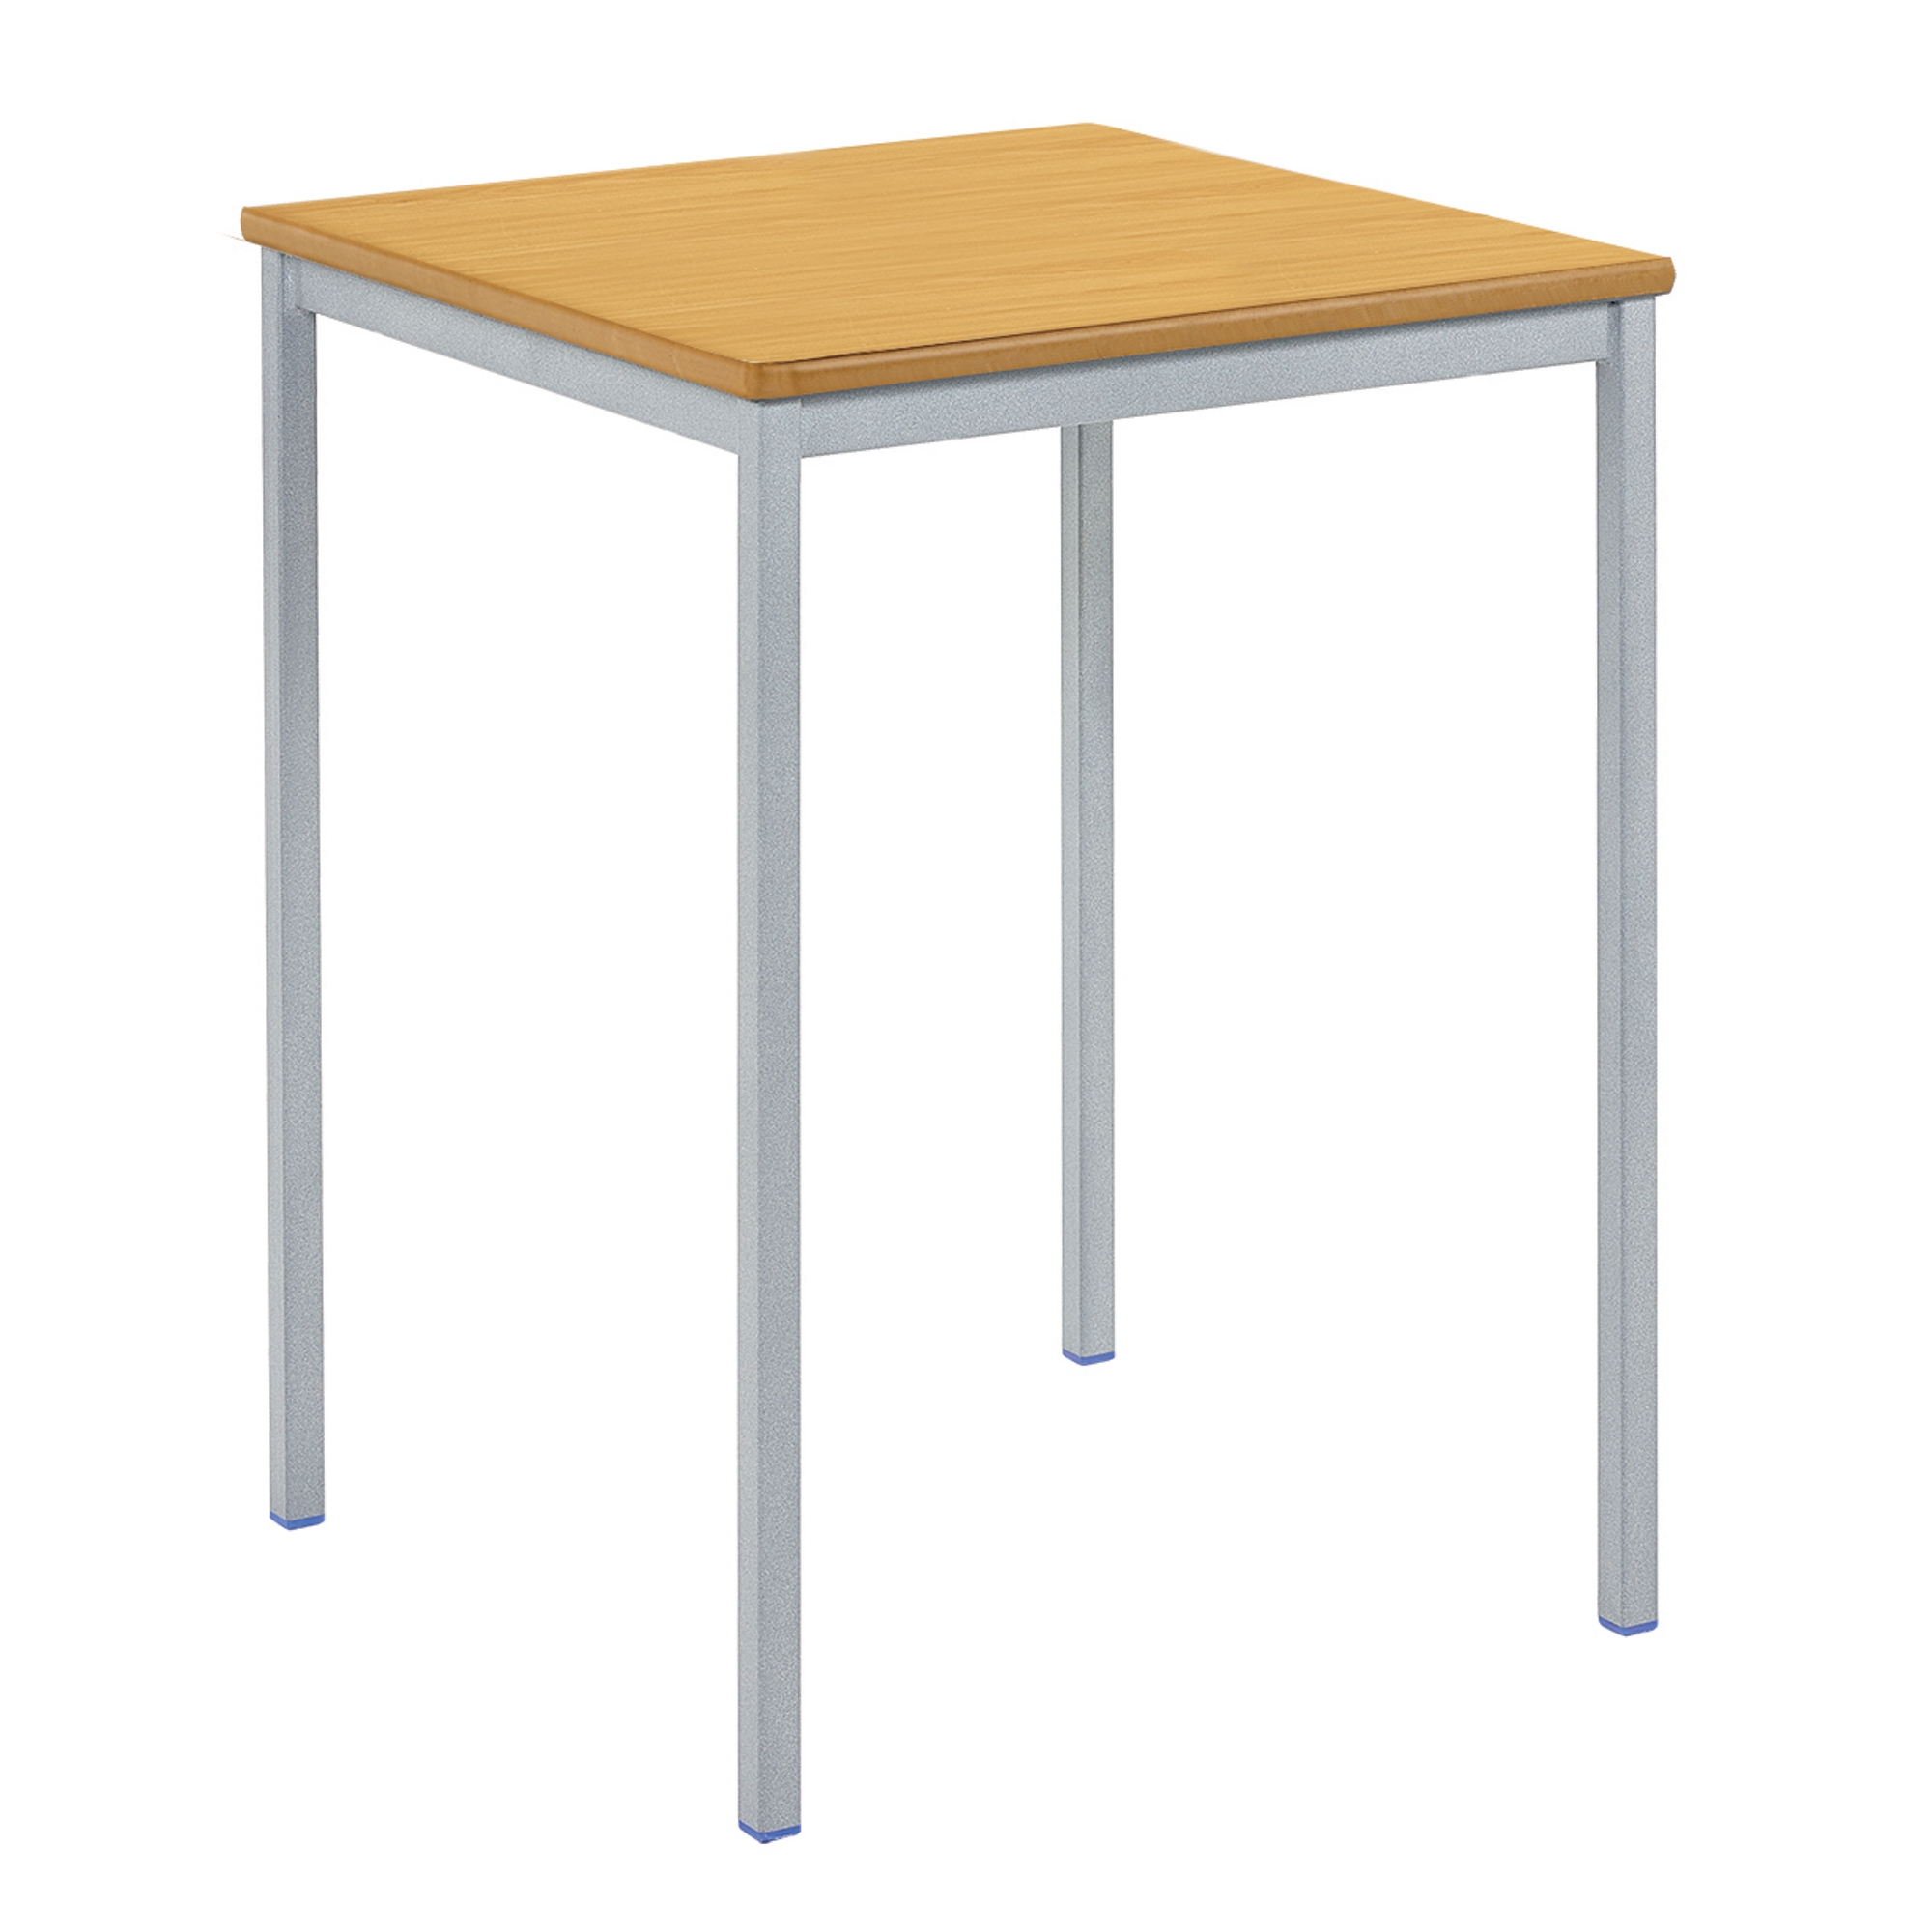 Classmates Square Fully Welded Classroom Table - 600 x 600 x 760mm - Beech